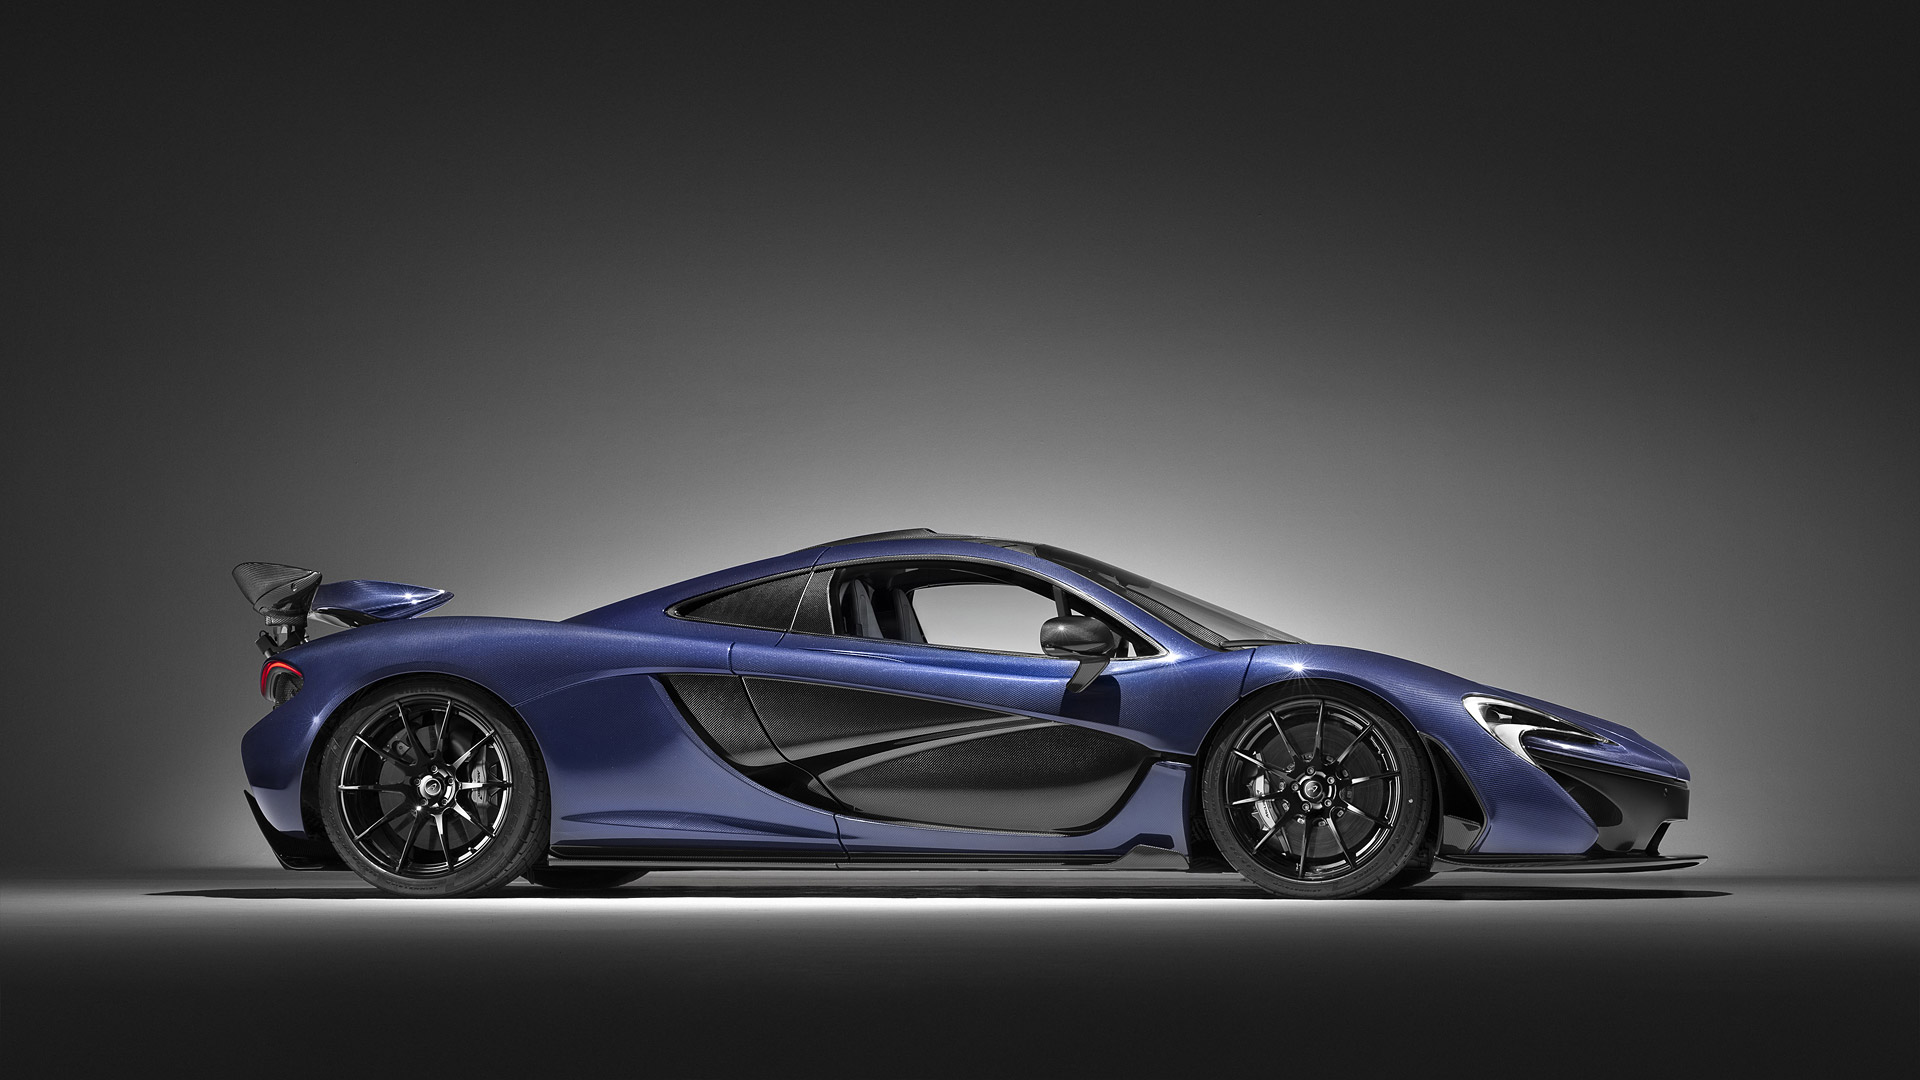 Mclaren P1 Side View 2, HD Cars, 4k Wallpapers, Images ...